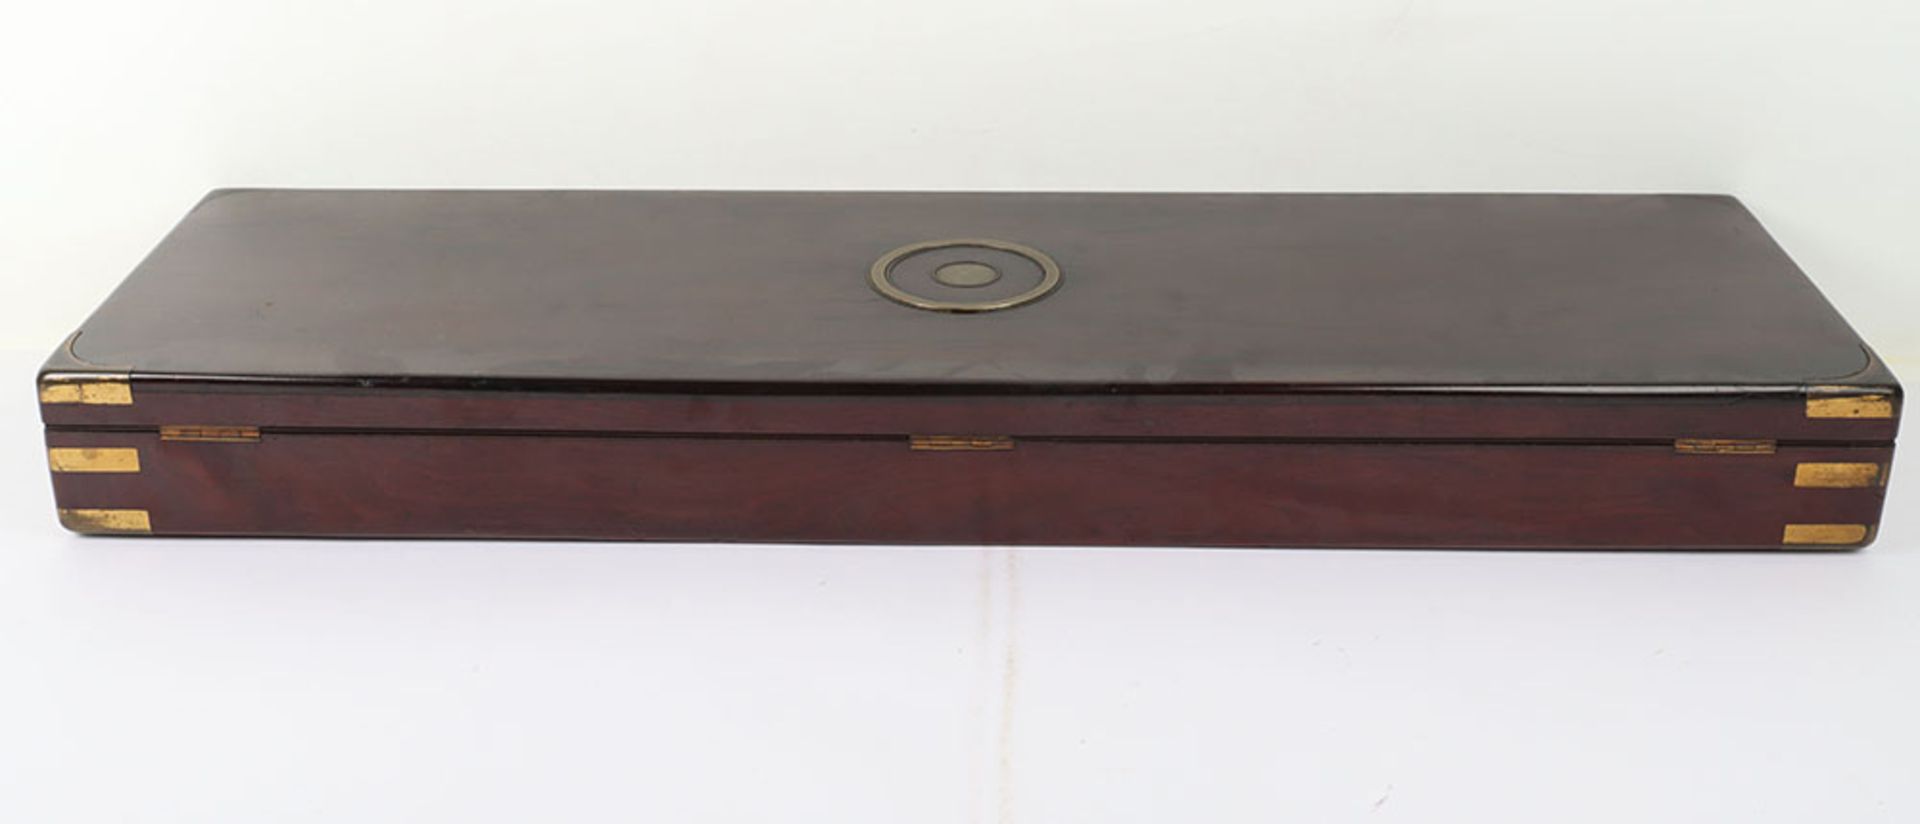 Good Brass Bound Mahogany Gun Case for a Double Barrel Percussion Gun or Rifle - Image 7 of 10